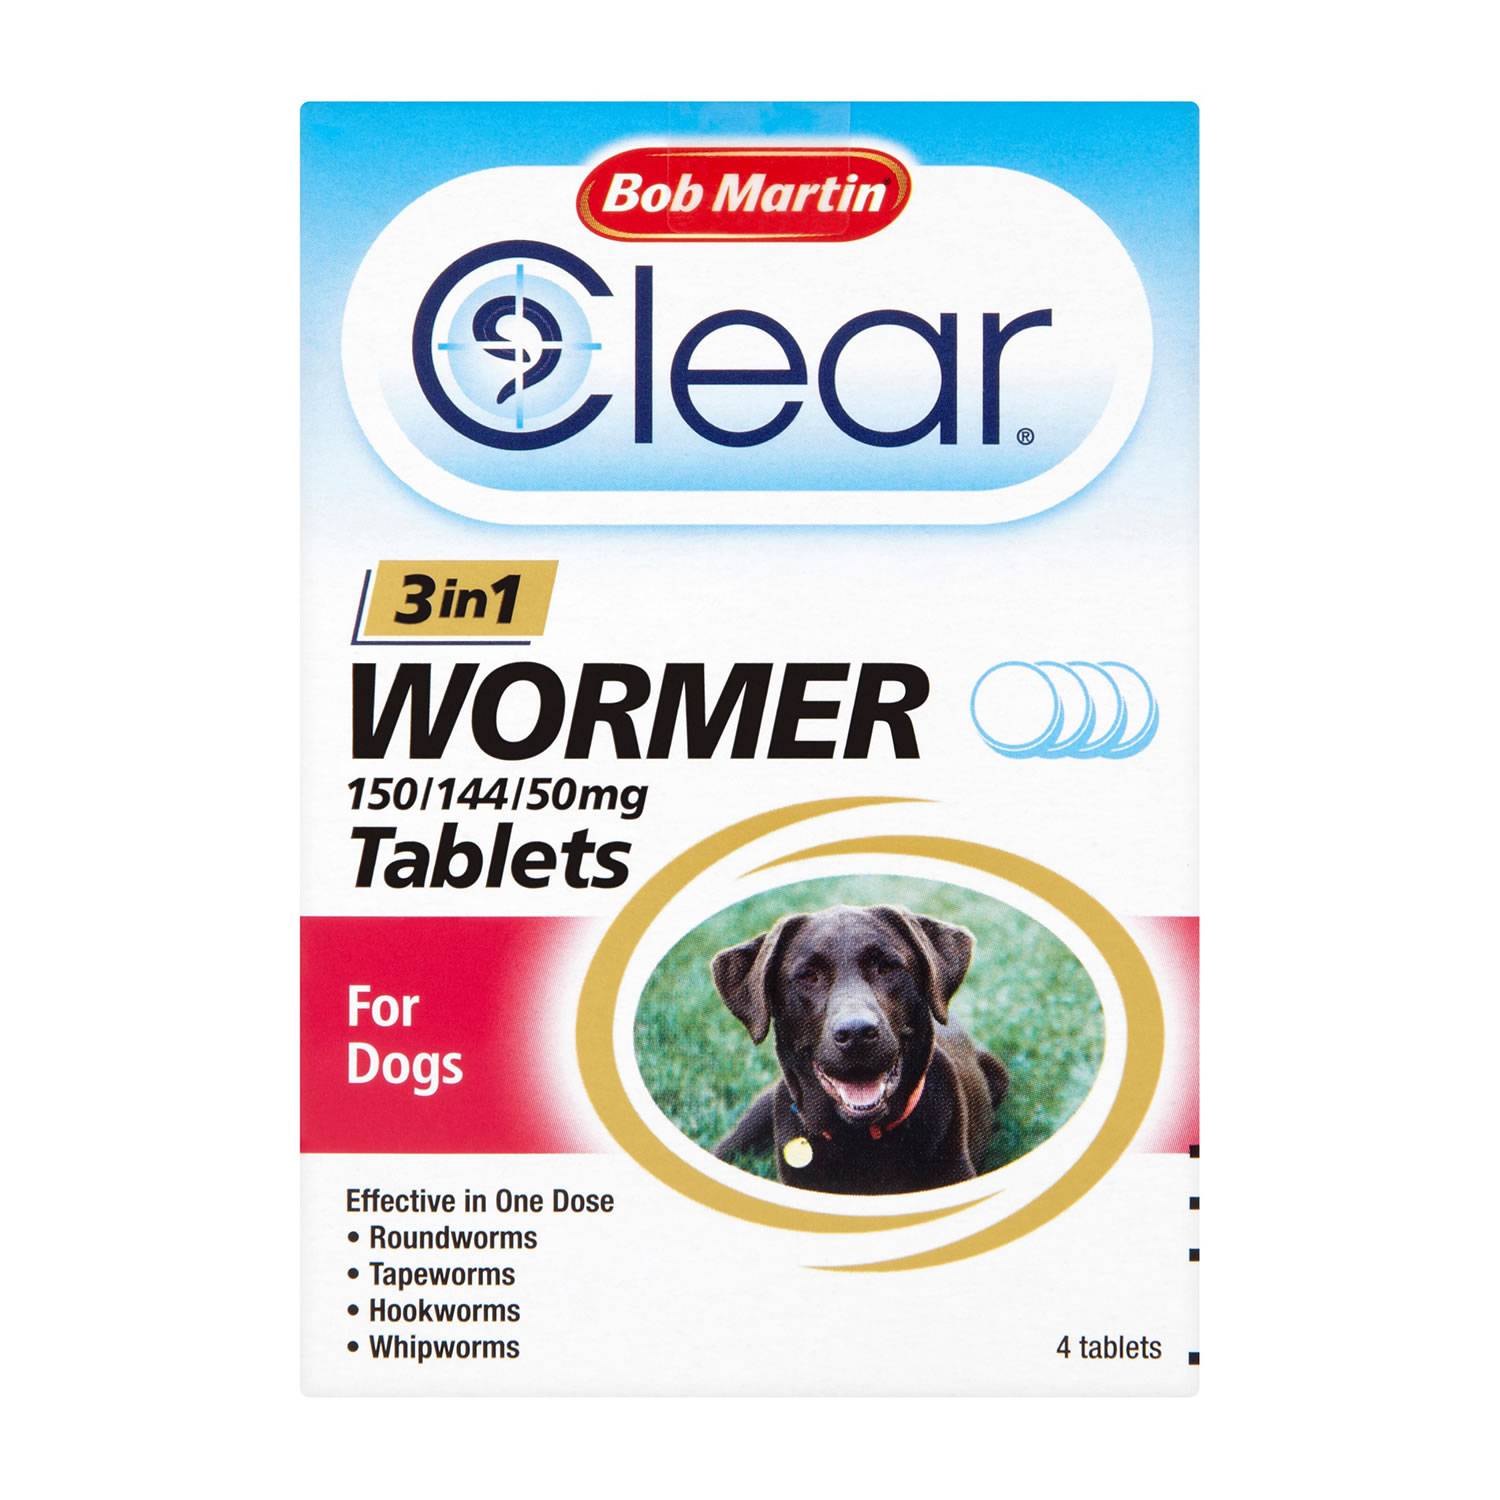 BOB MARTIN CLEAR 3-IN-1 WORMER TABLETS FOR DOGS BOB MARTIN CLEAR 3-IN-1 WORMER TABLETS FOR DOGS 4 PACK  4 PACK